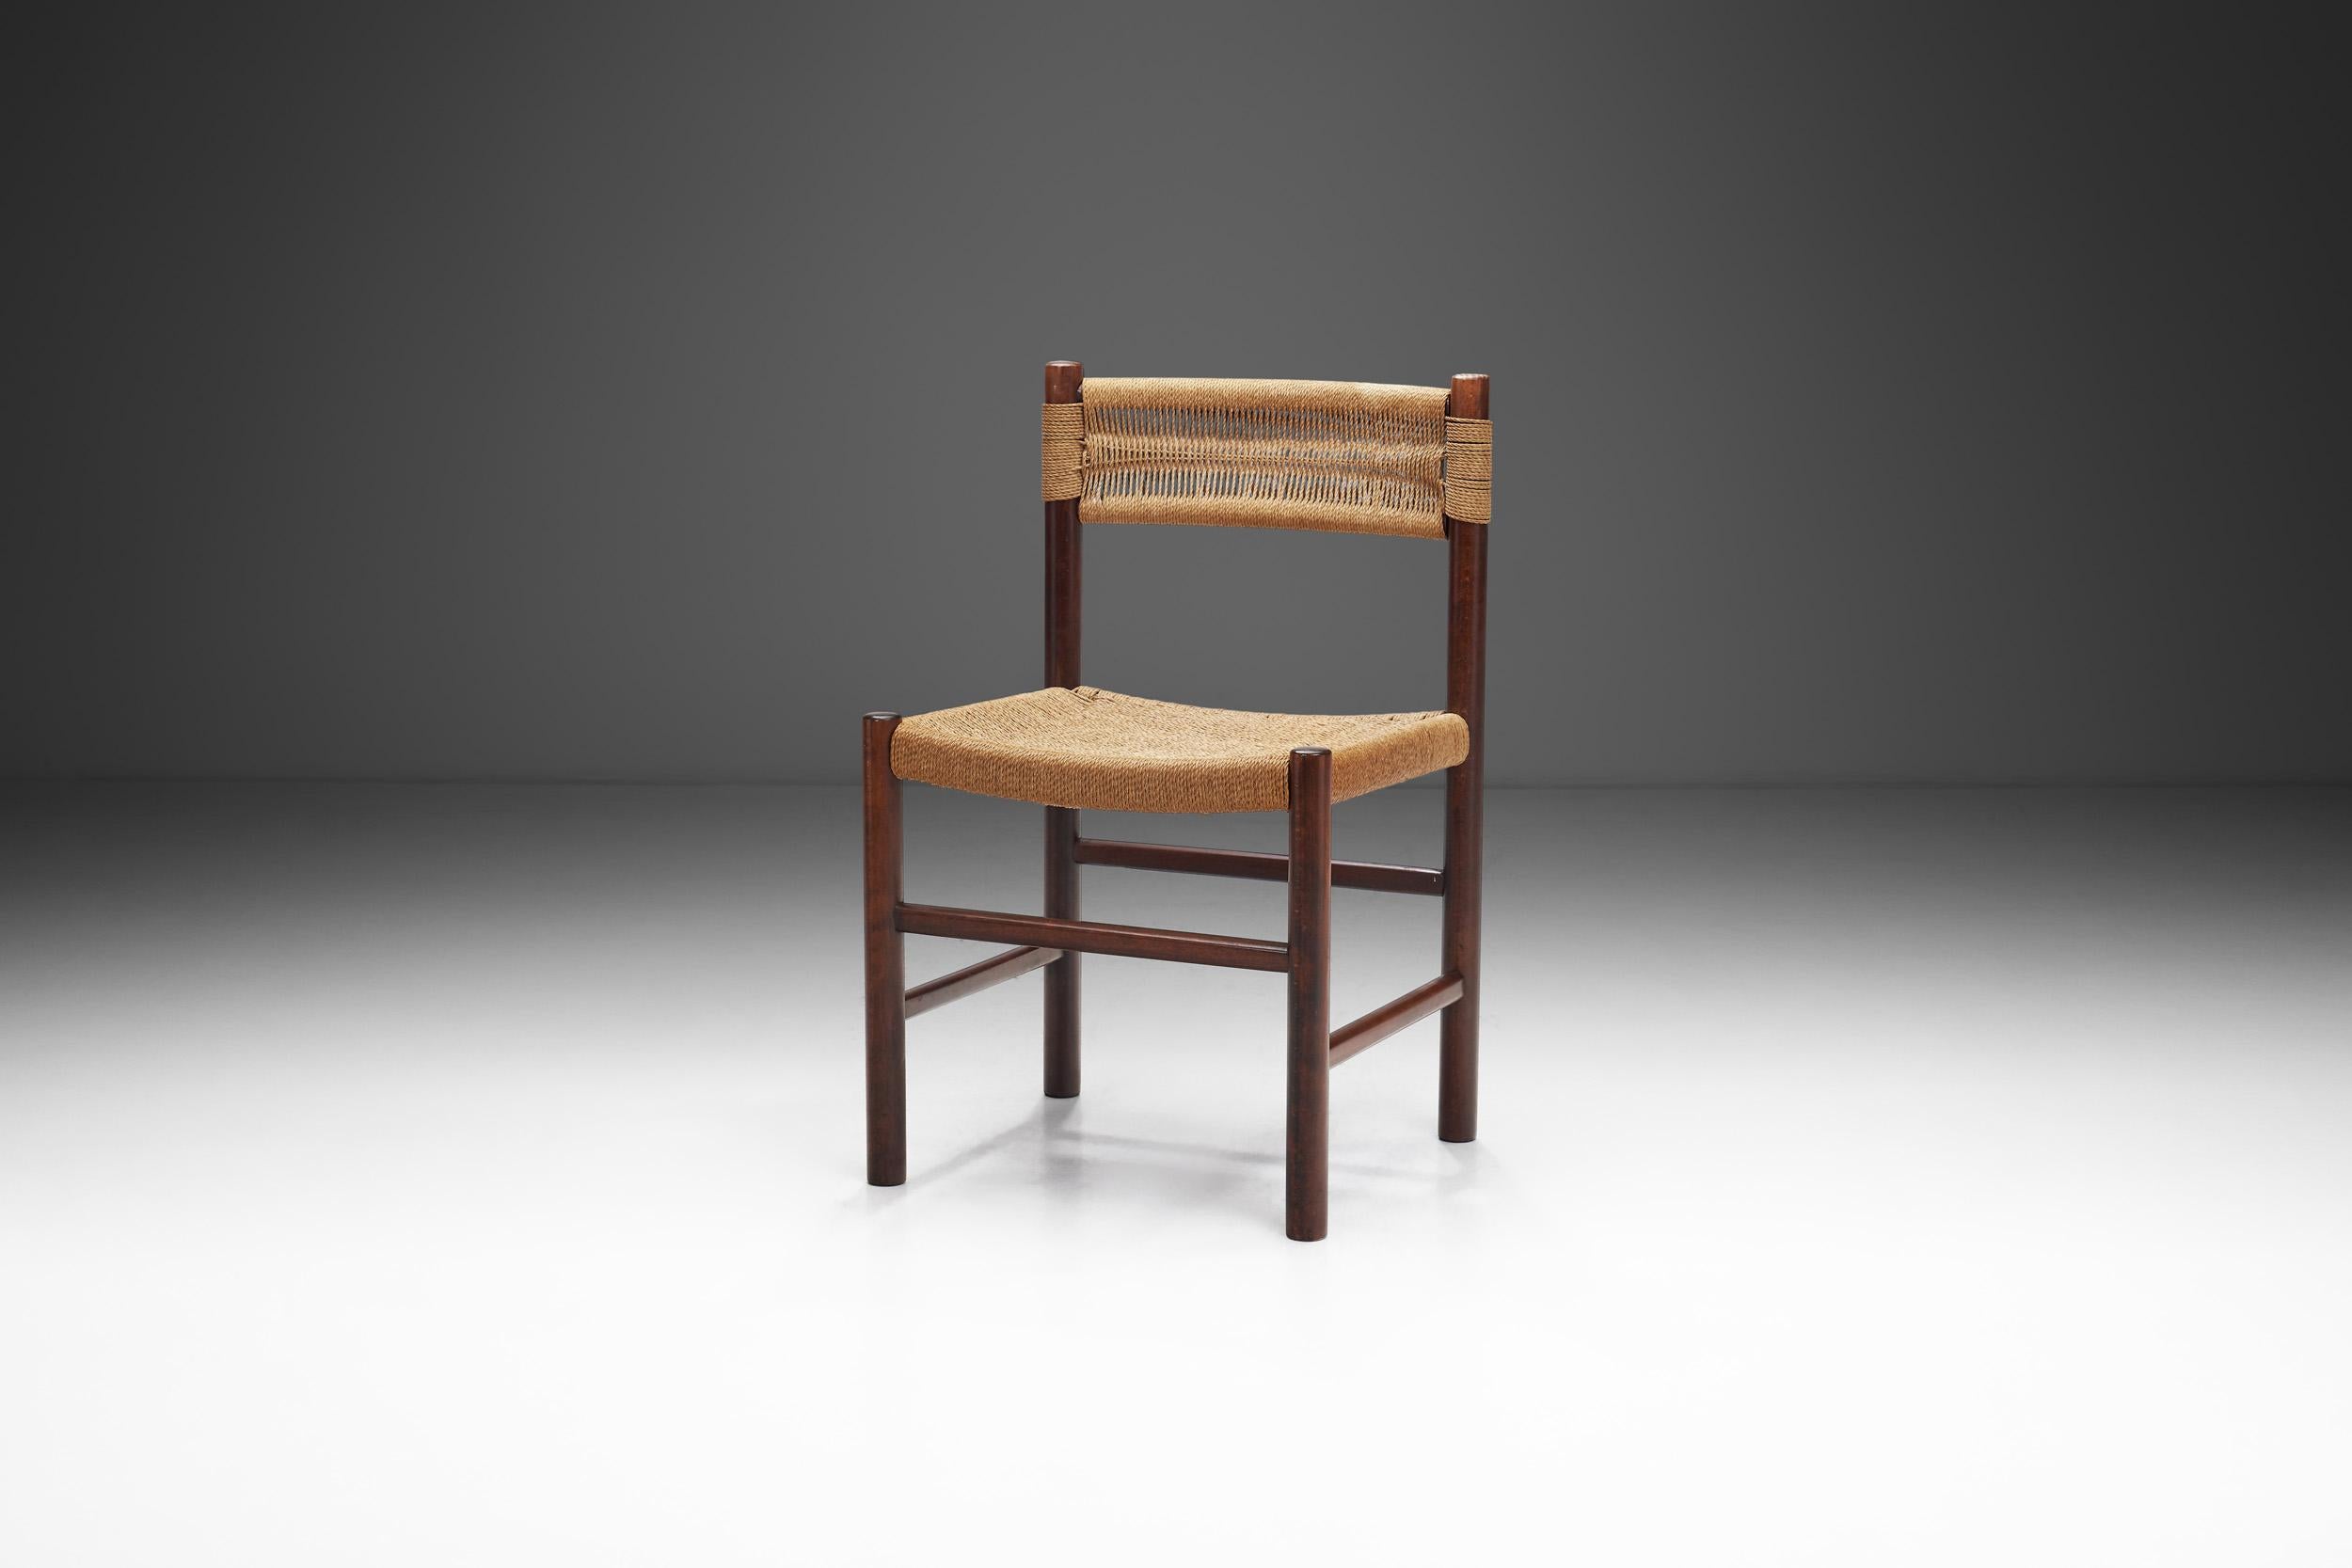 European “Dordogne” Style Chair with Woven Papercord Seat and Back, Europe ca 1960s For Sale